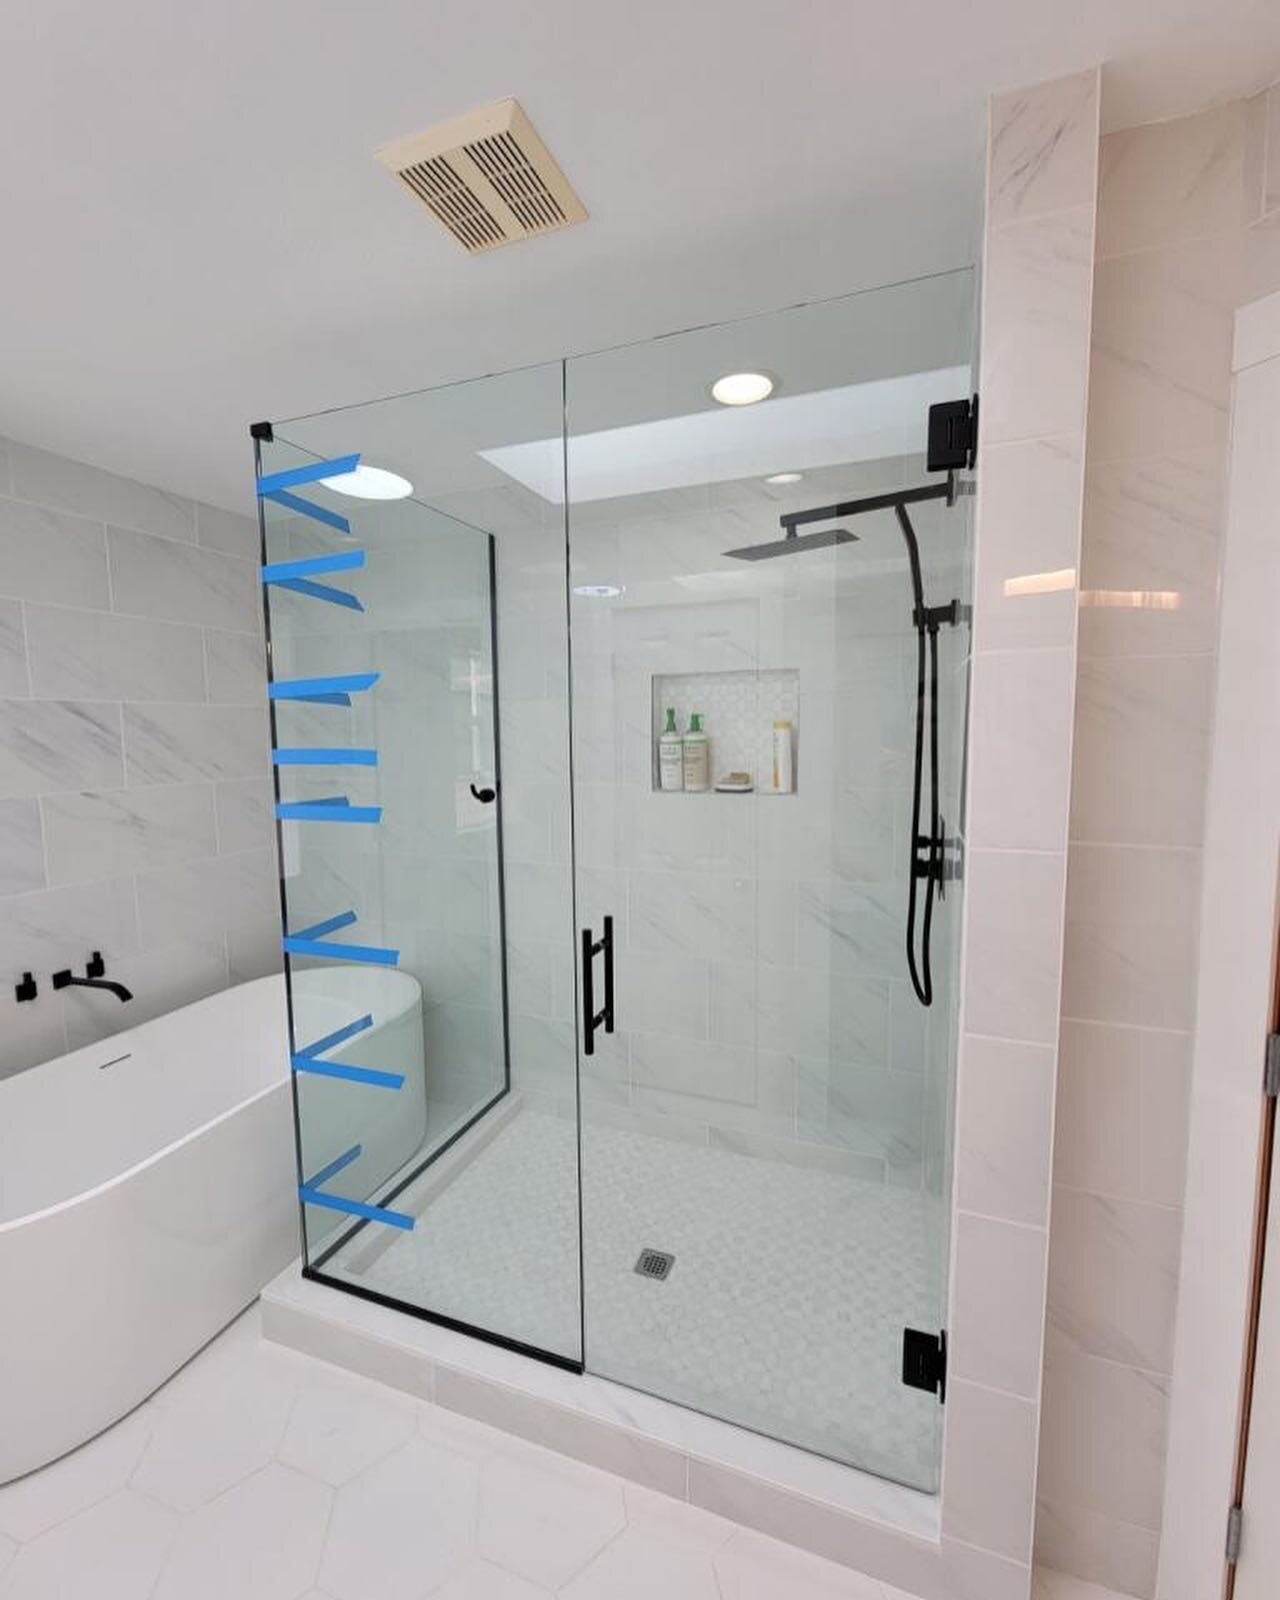 Installed by our technicians, Marcus and Ozzy. 

#seattleshowers #seattleshower #seattleshowerdoors #framelessglassenclosure #framelessglassenclosures #showerenclosure #glassshowerenclosure #frameless #framelessdesign #showerdesign #showerdoors #smal